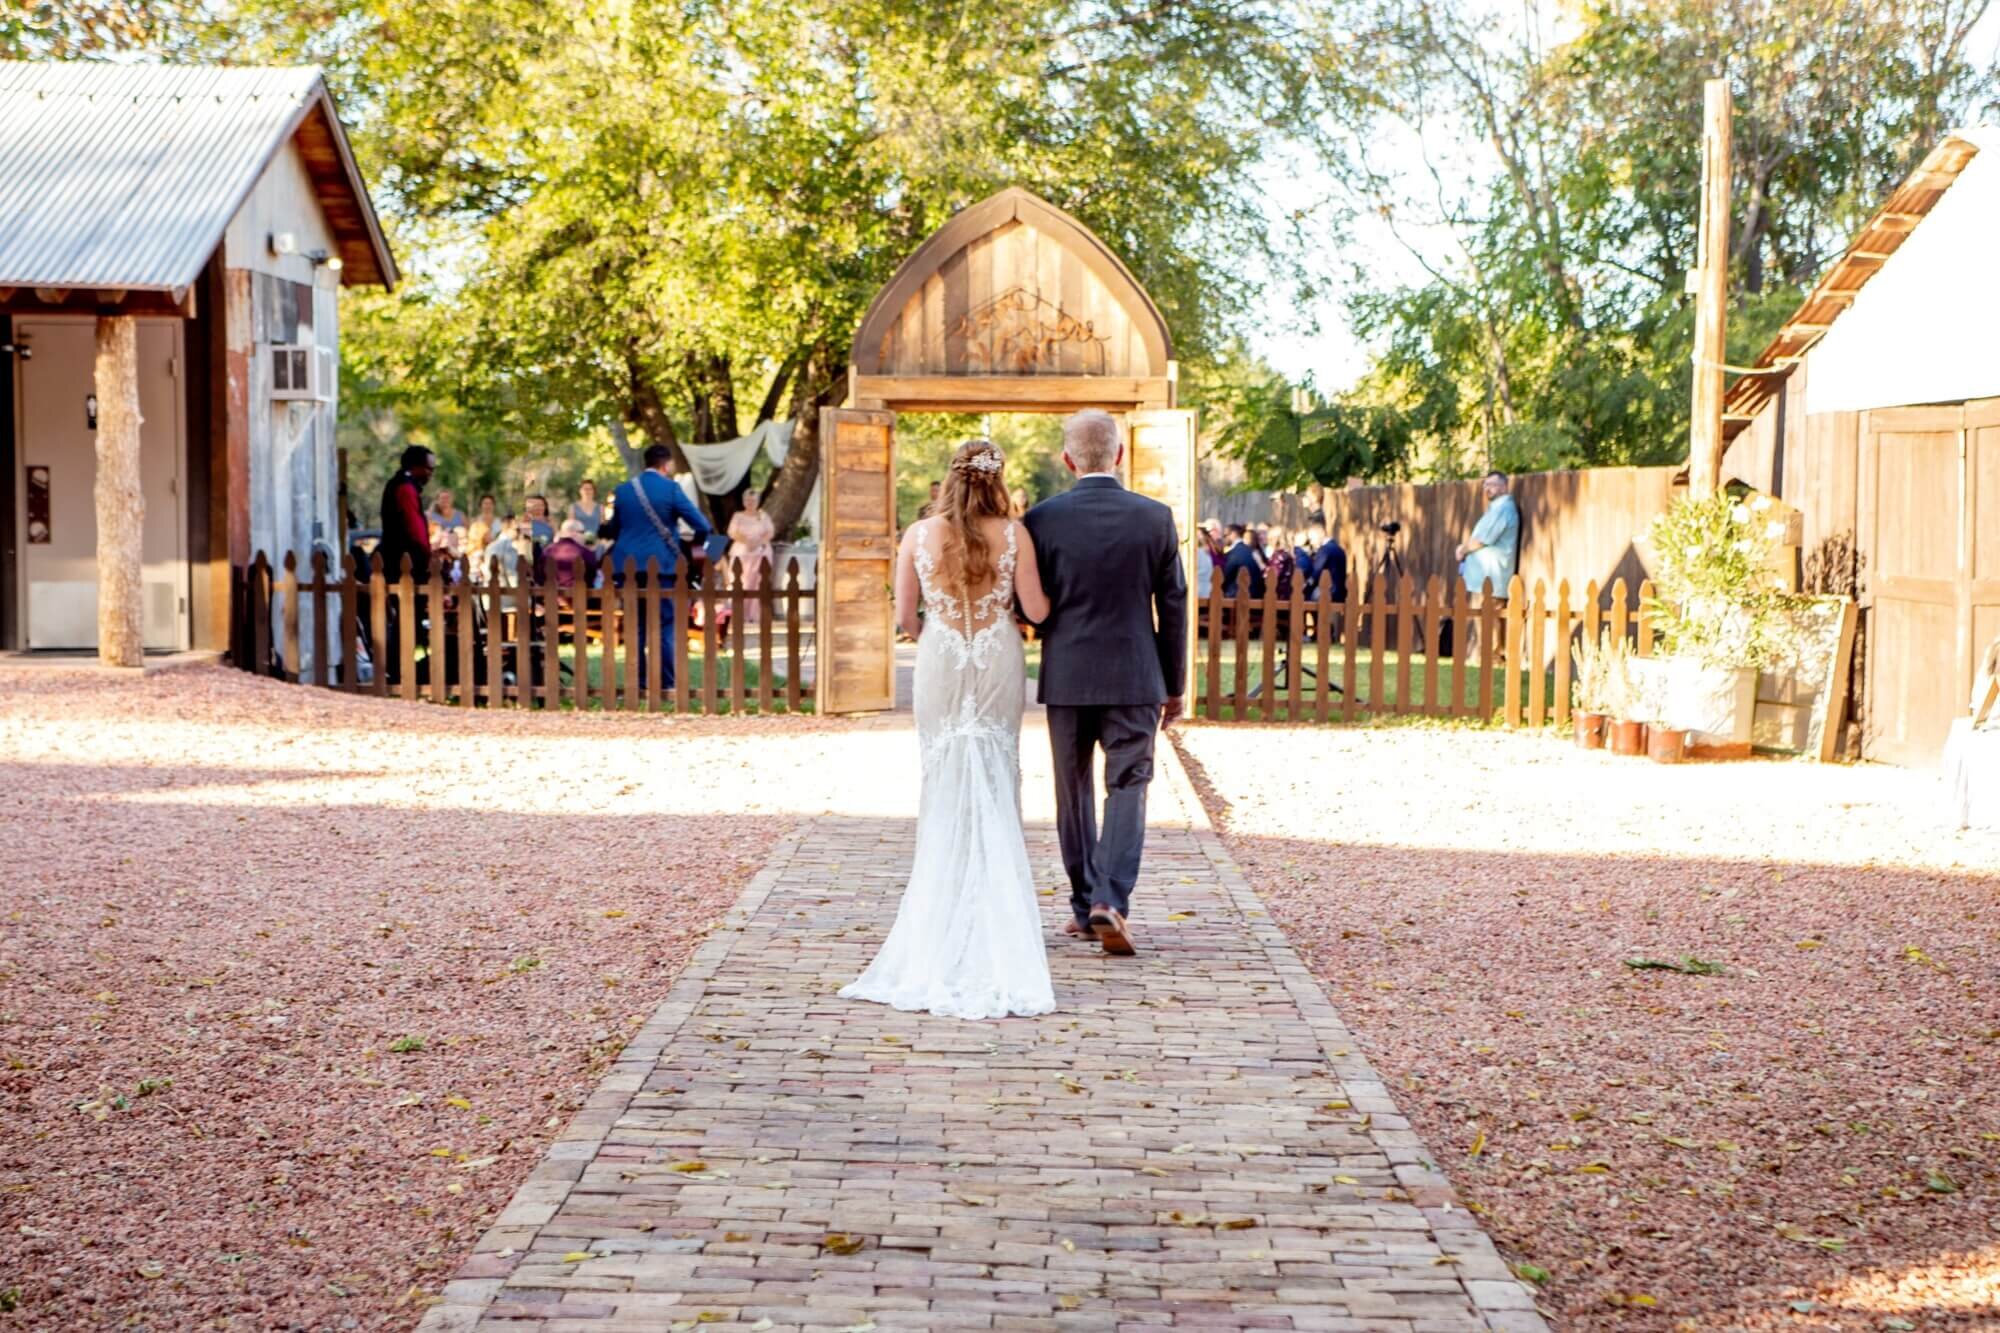 Ceremony site at The Barn at UVX Rustic Ranch in Cottonwood, Arizona